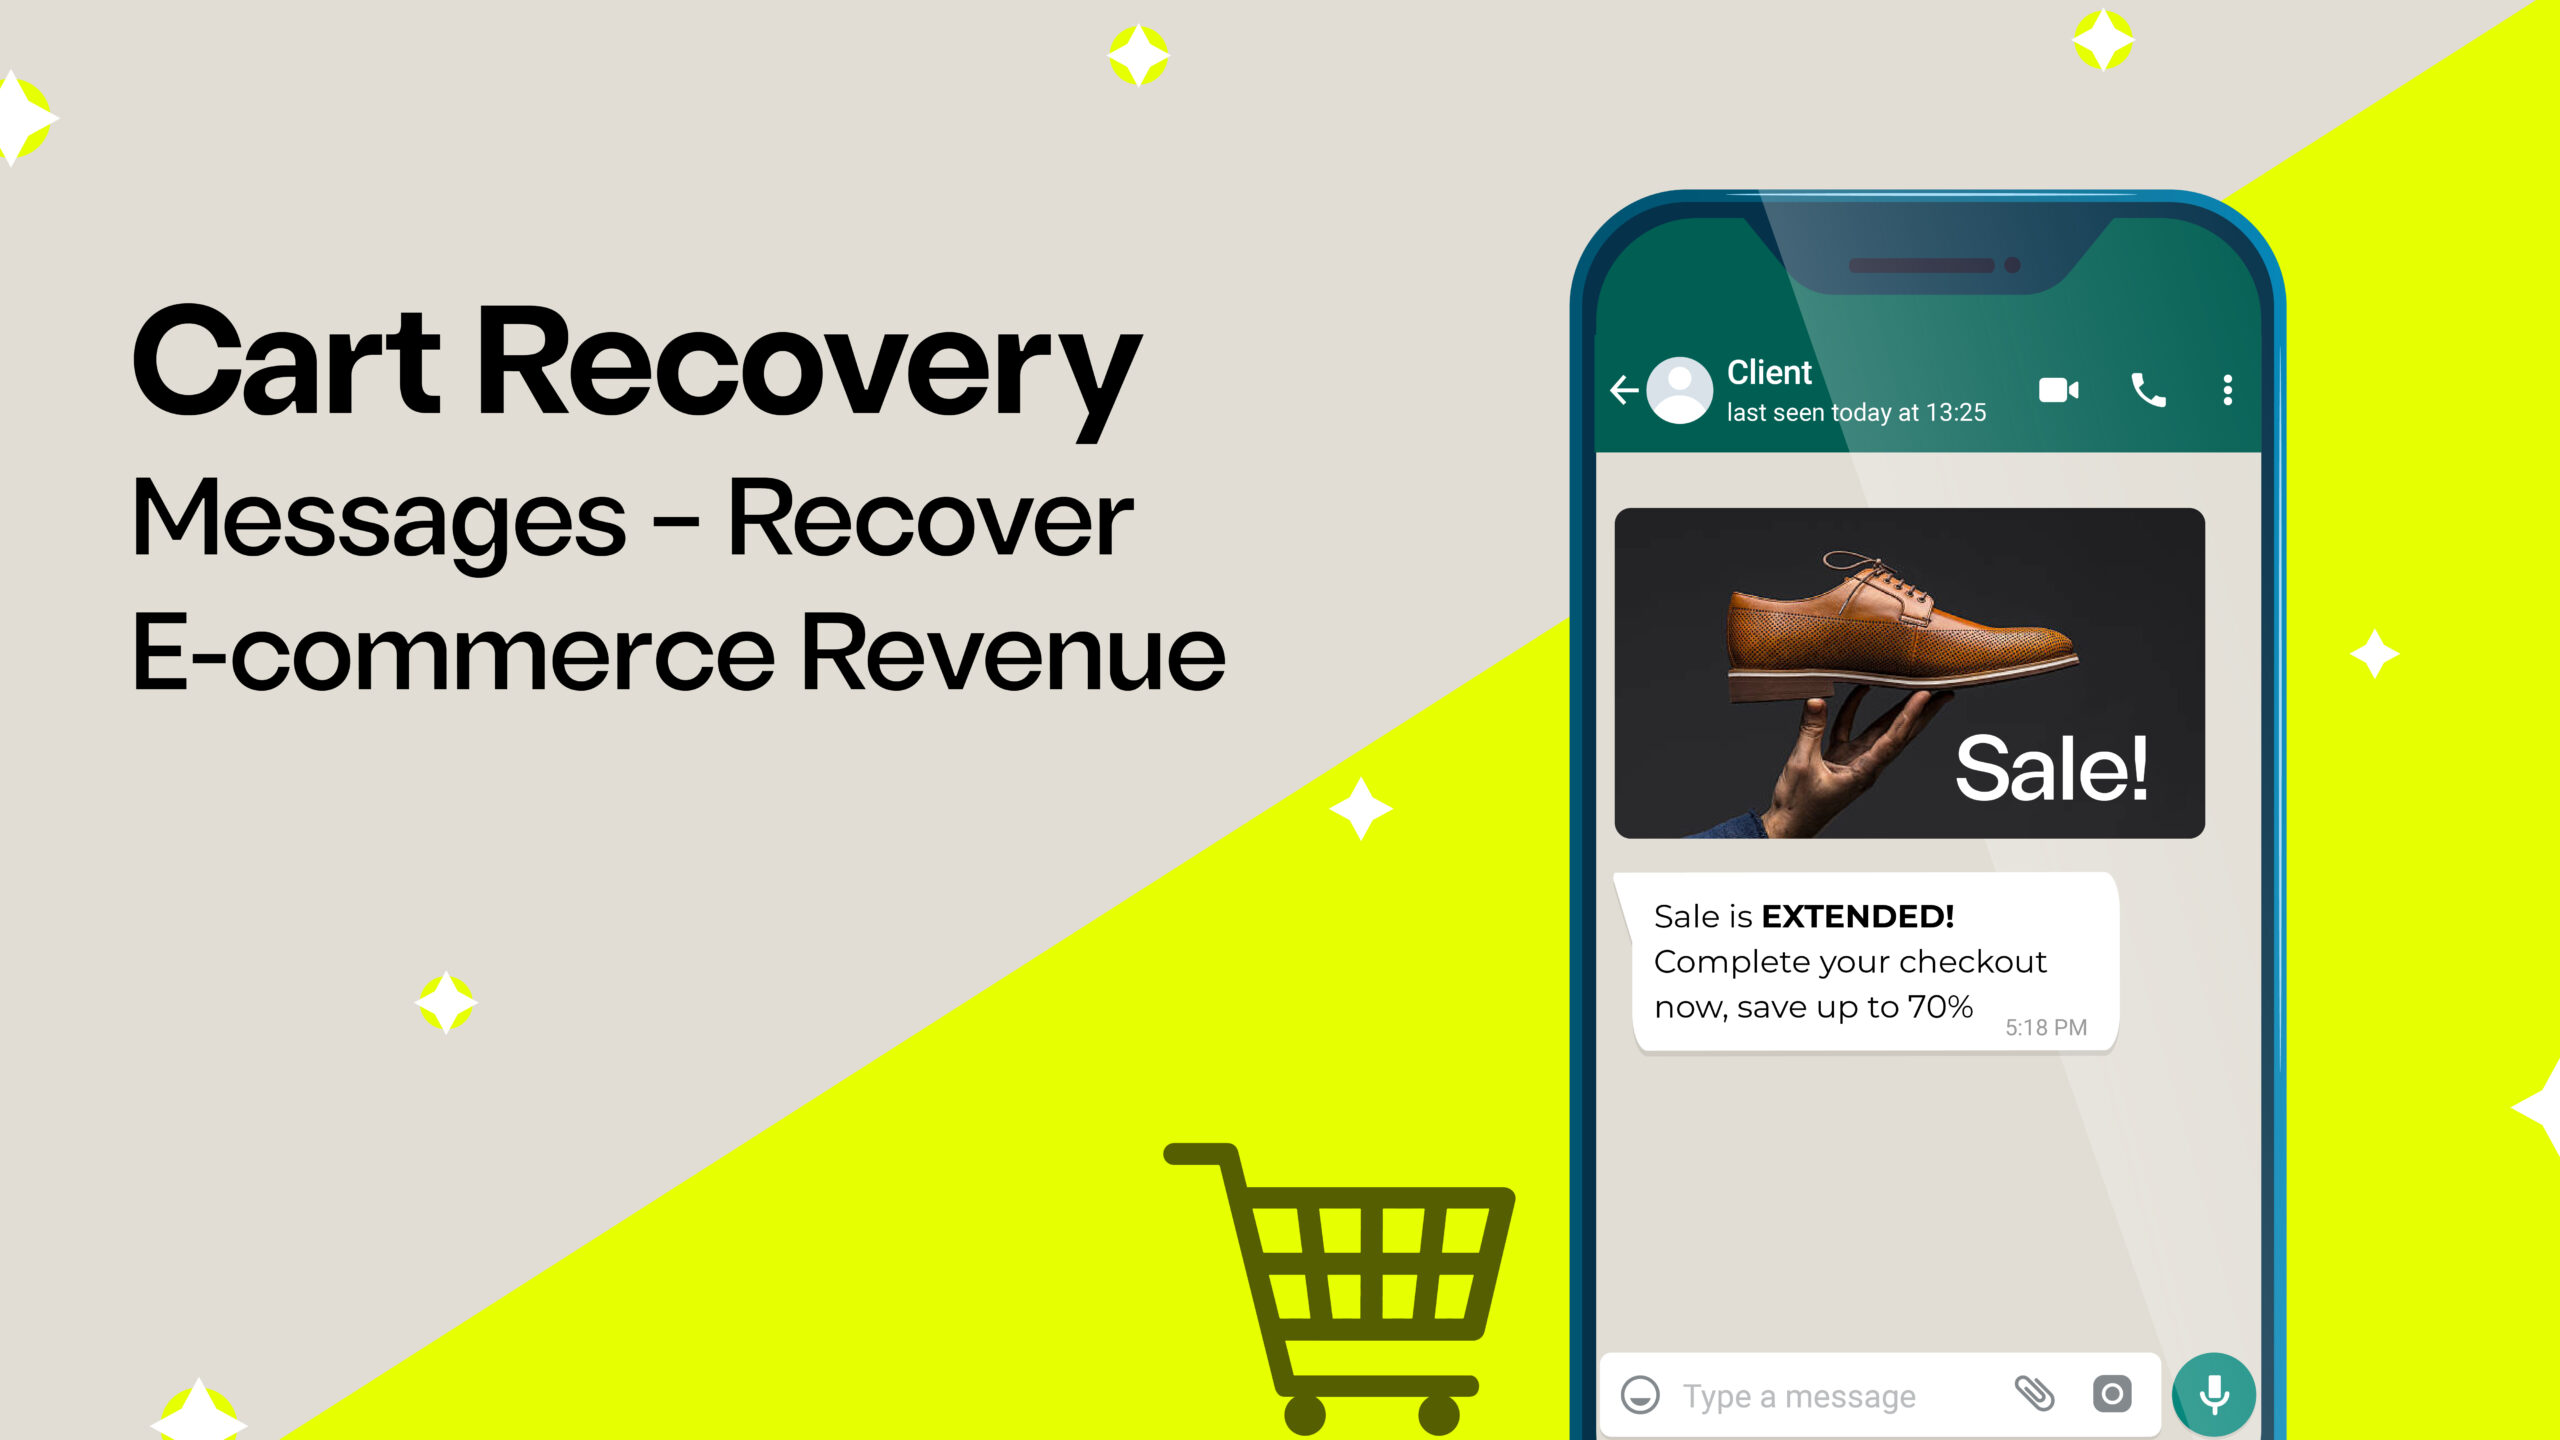 Cart Recovery Messages – Recover E-commerce Revenue